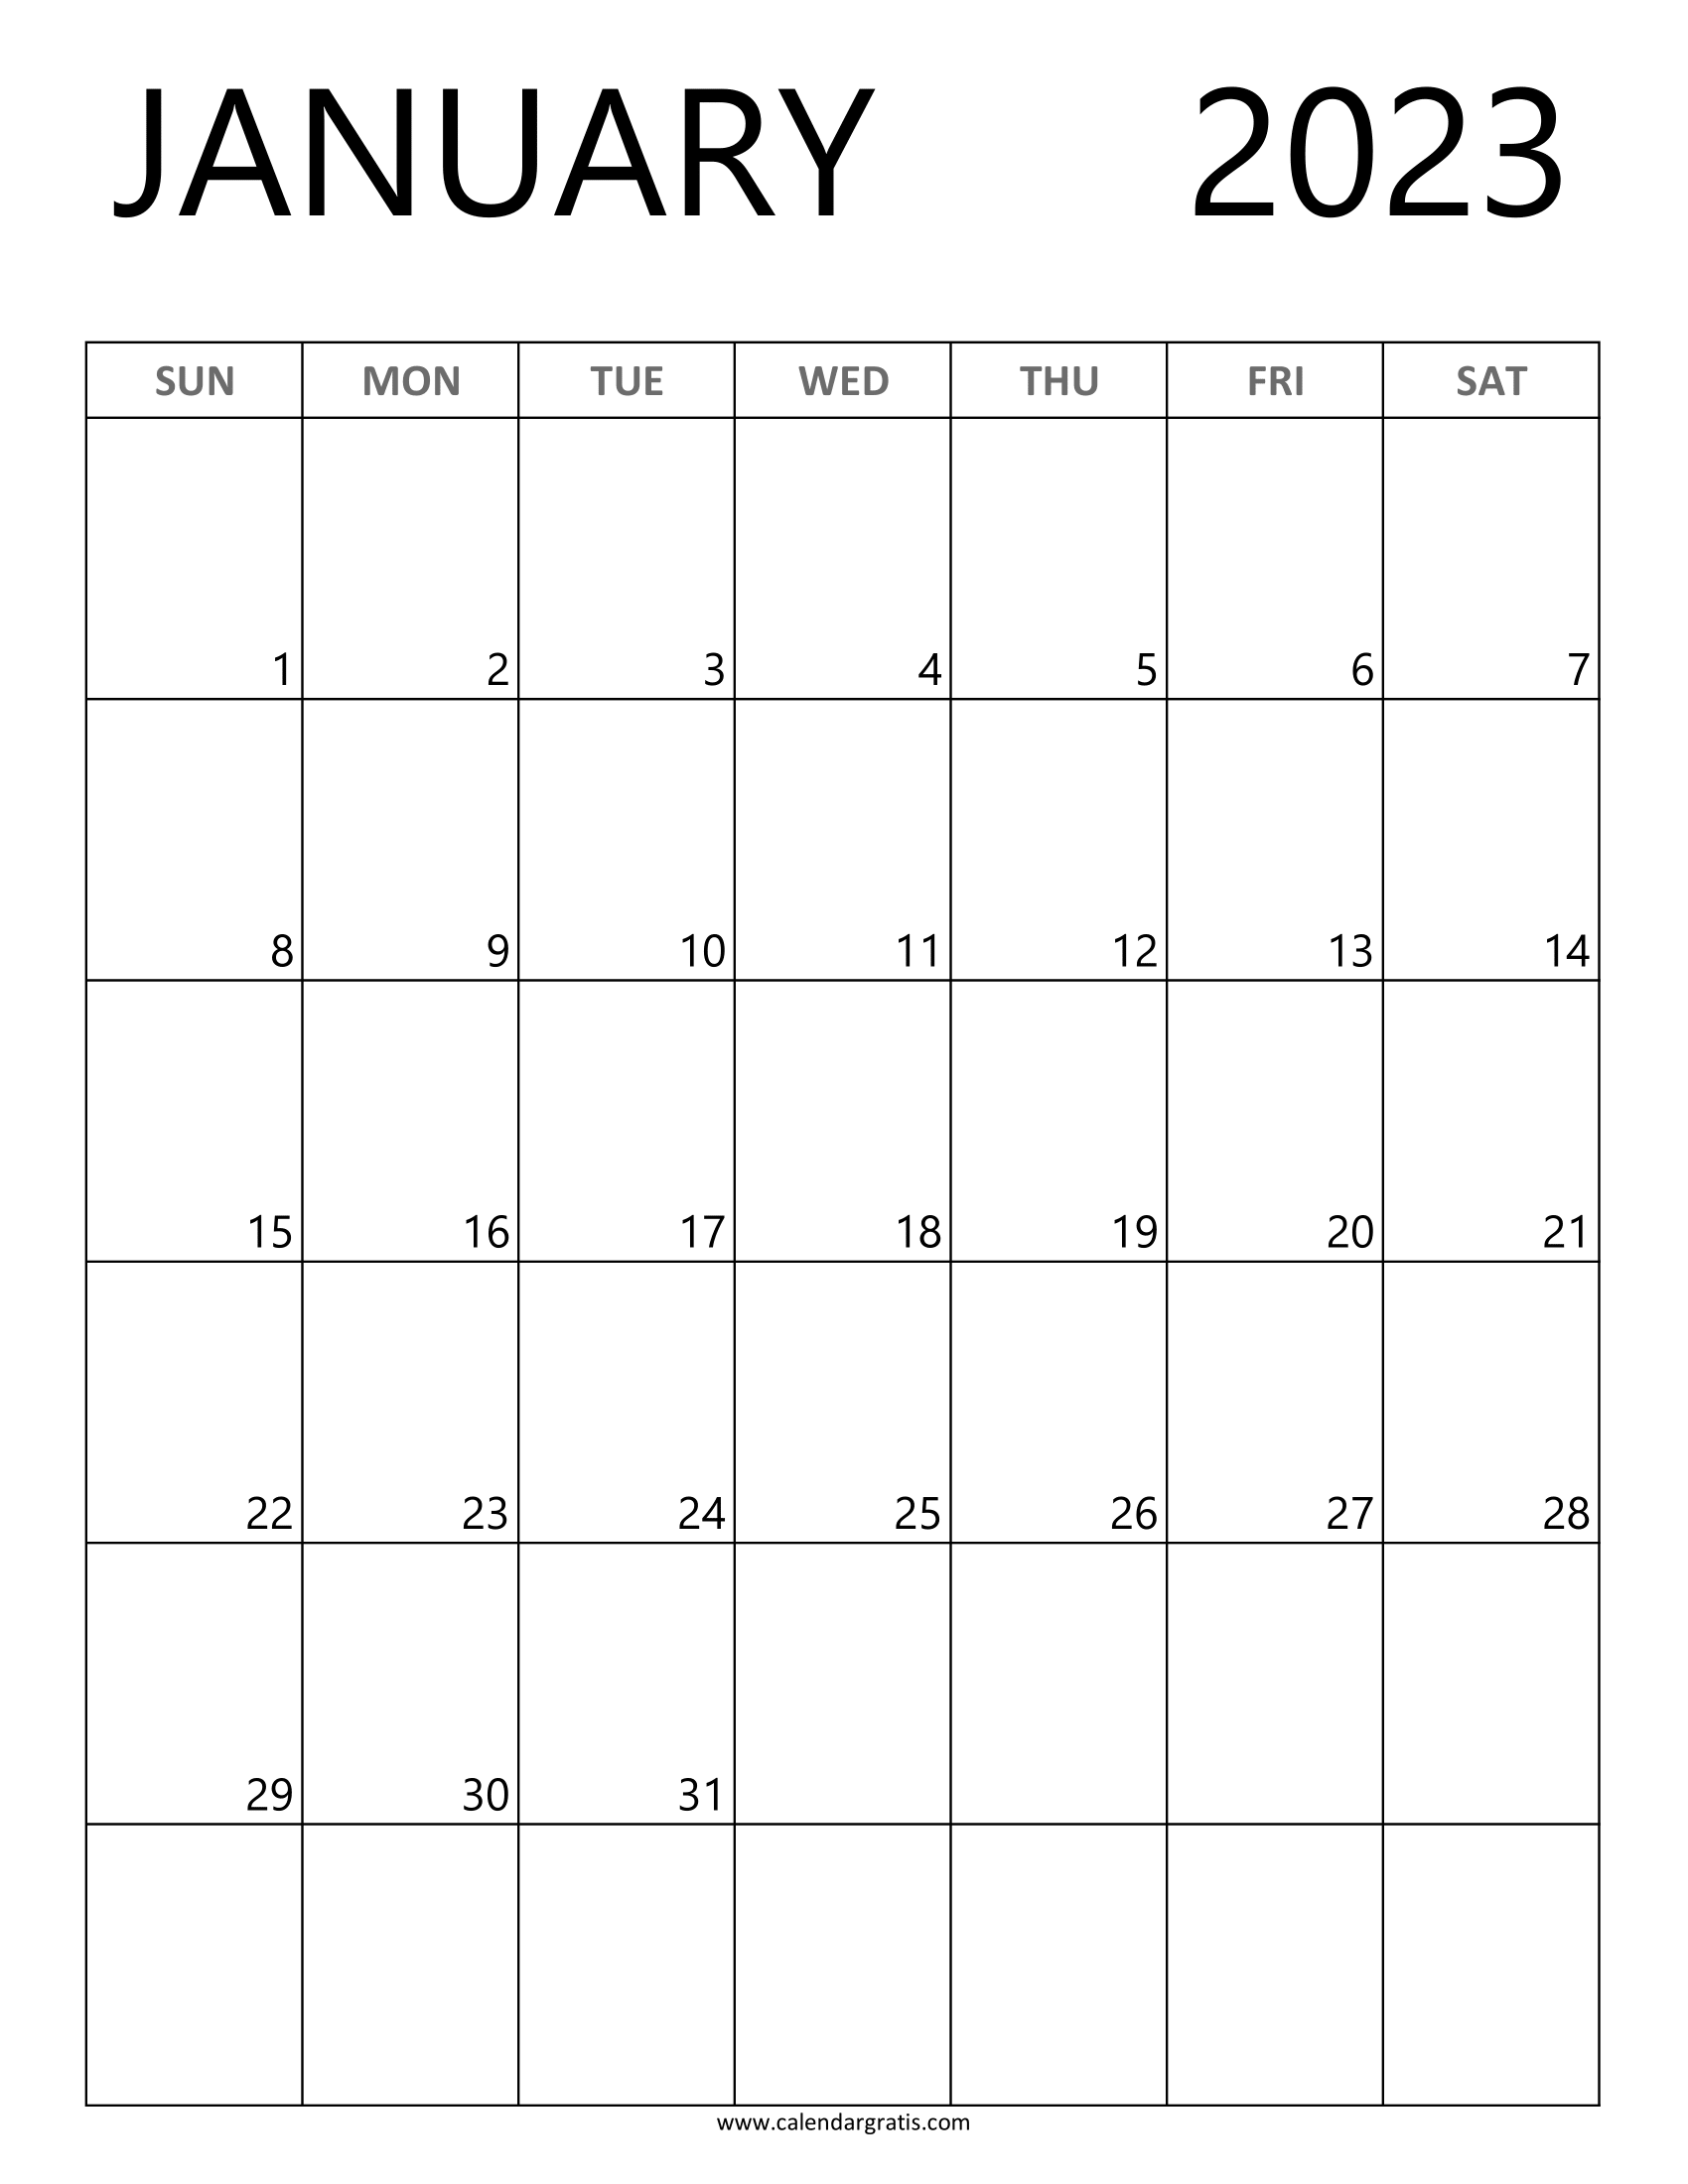 Free Printable A4 Size Calendar for January 2023. Instant download monthly calendar template in a vertical layout.